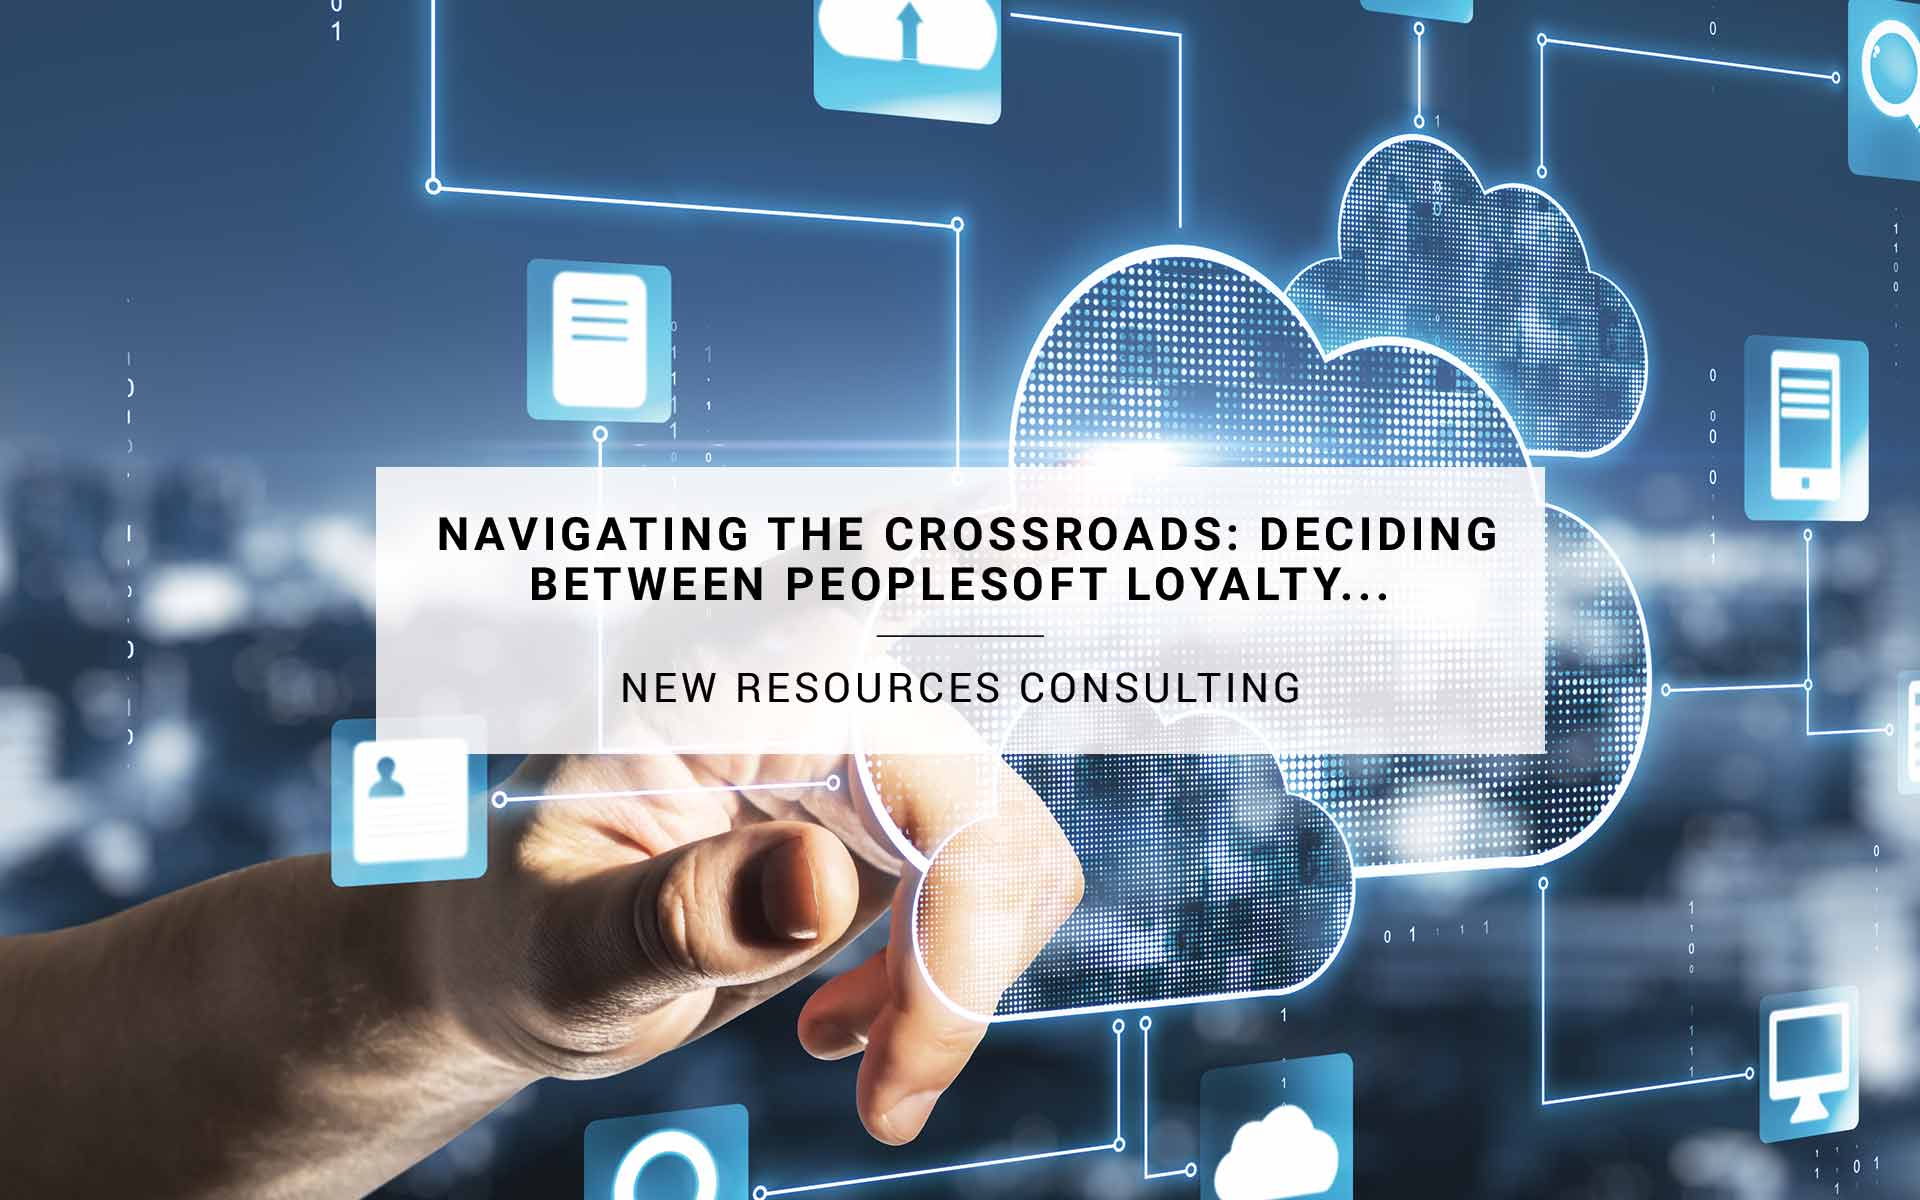 Navigating the Crossroads: Deciding Between PeopleSoft Loyalty and Cloud Innovation in Enterprise Solutions